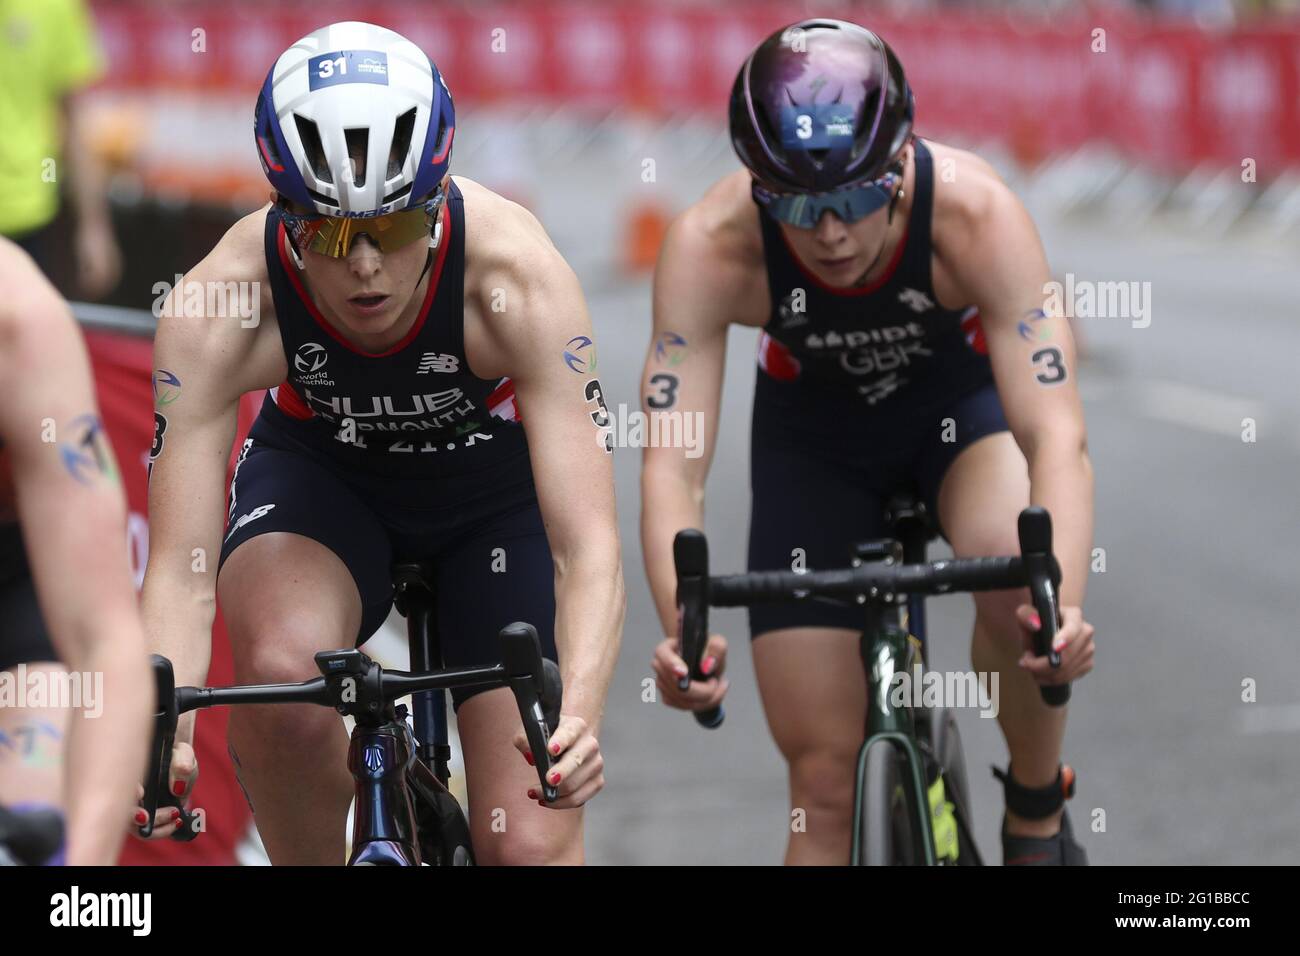 Leeds, UK. 06th June, 2021. Leah Learmonth in action during the AJ Bell 2021 World Triathlon Series in Roundhay Park, Leeds. Credit: SPP Sport Press Photo. /Alamy Live News Stock Photo